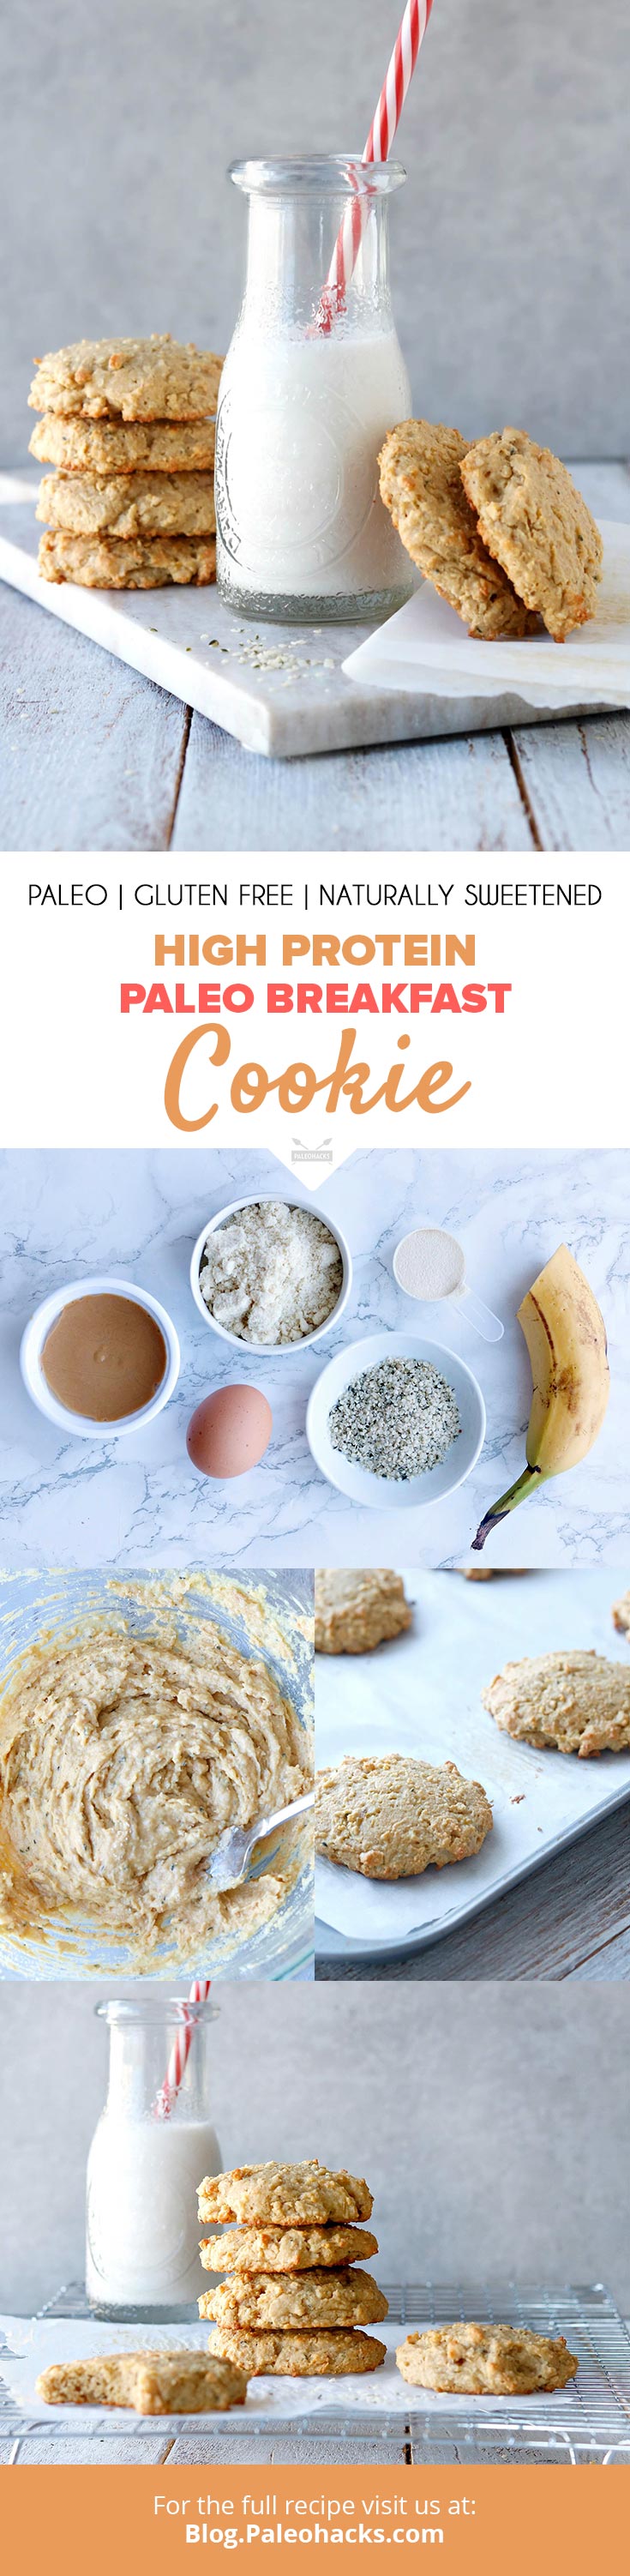 Soft-baked and protein-packed, these breakfast cookies are a tasty way to kick-start your day.